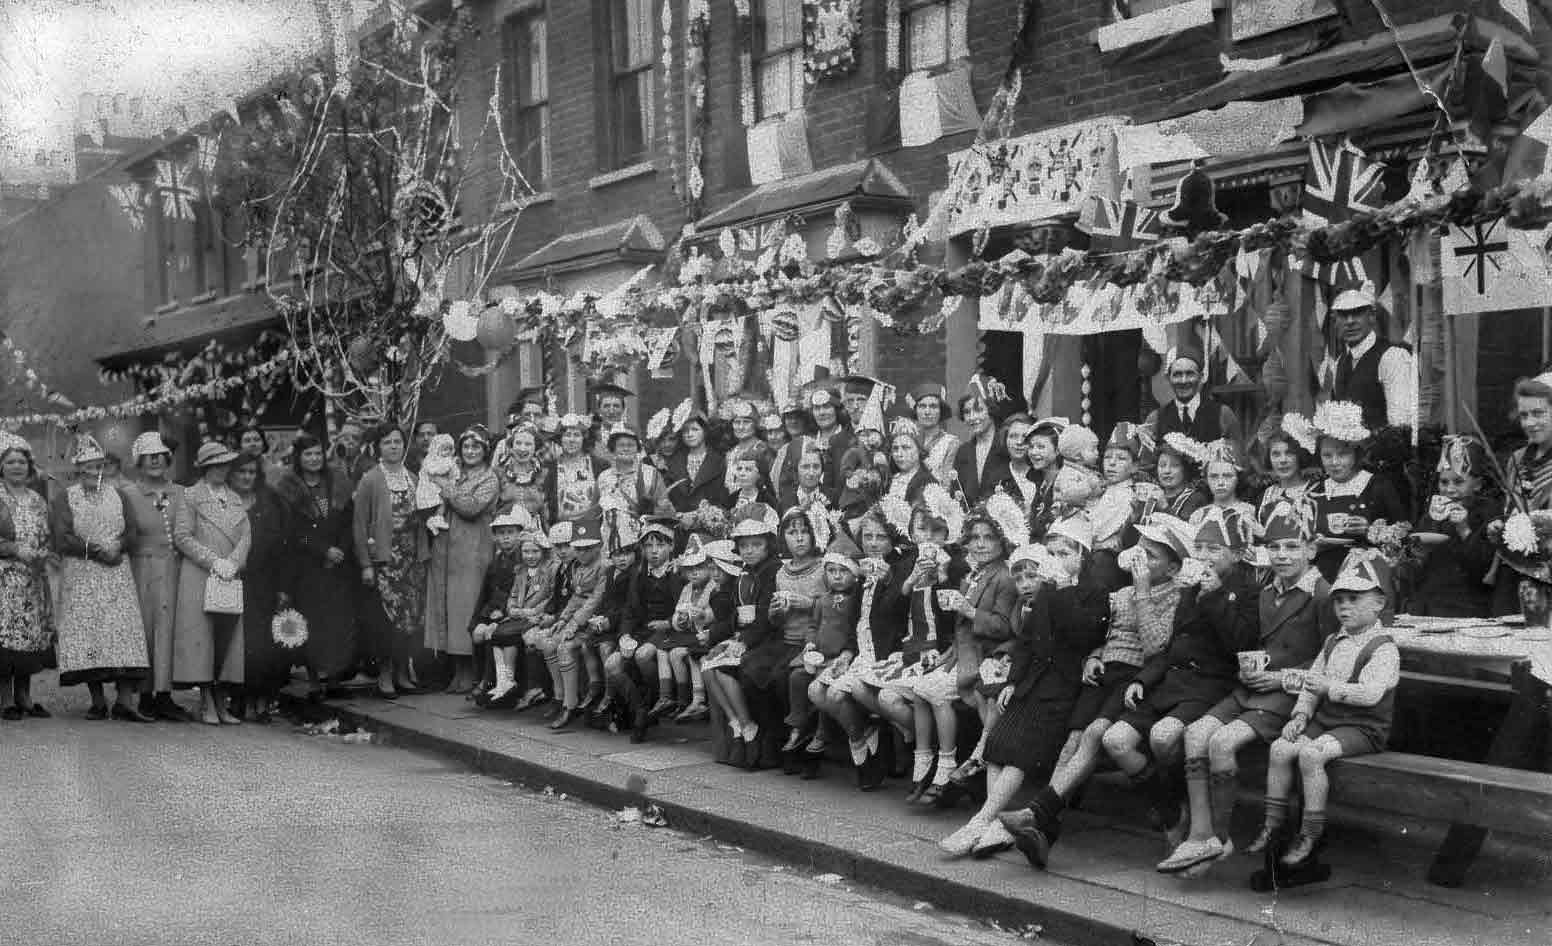 coronation street party of King George Vi